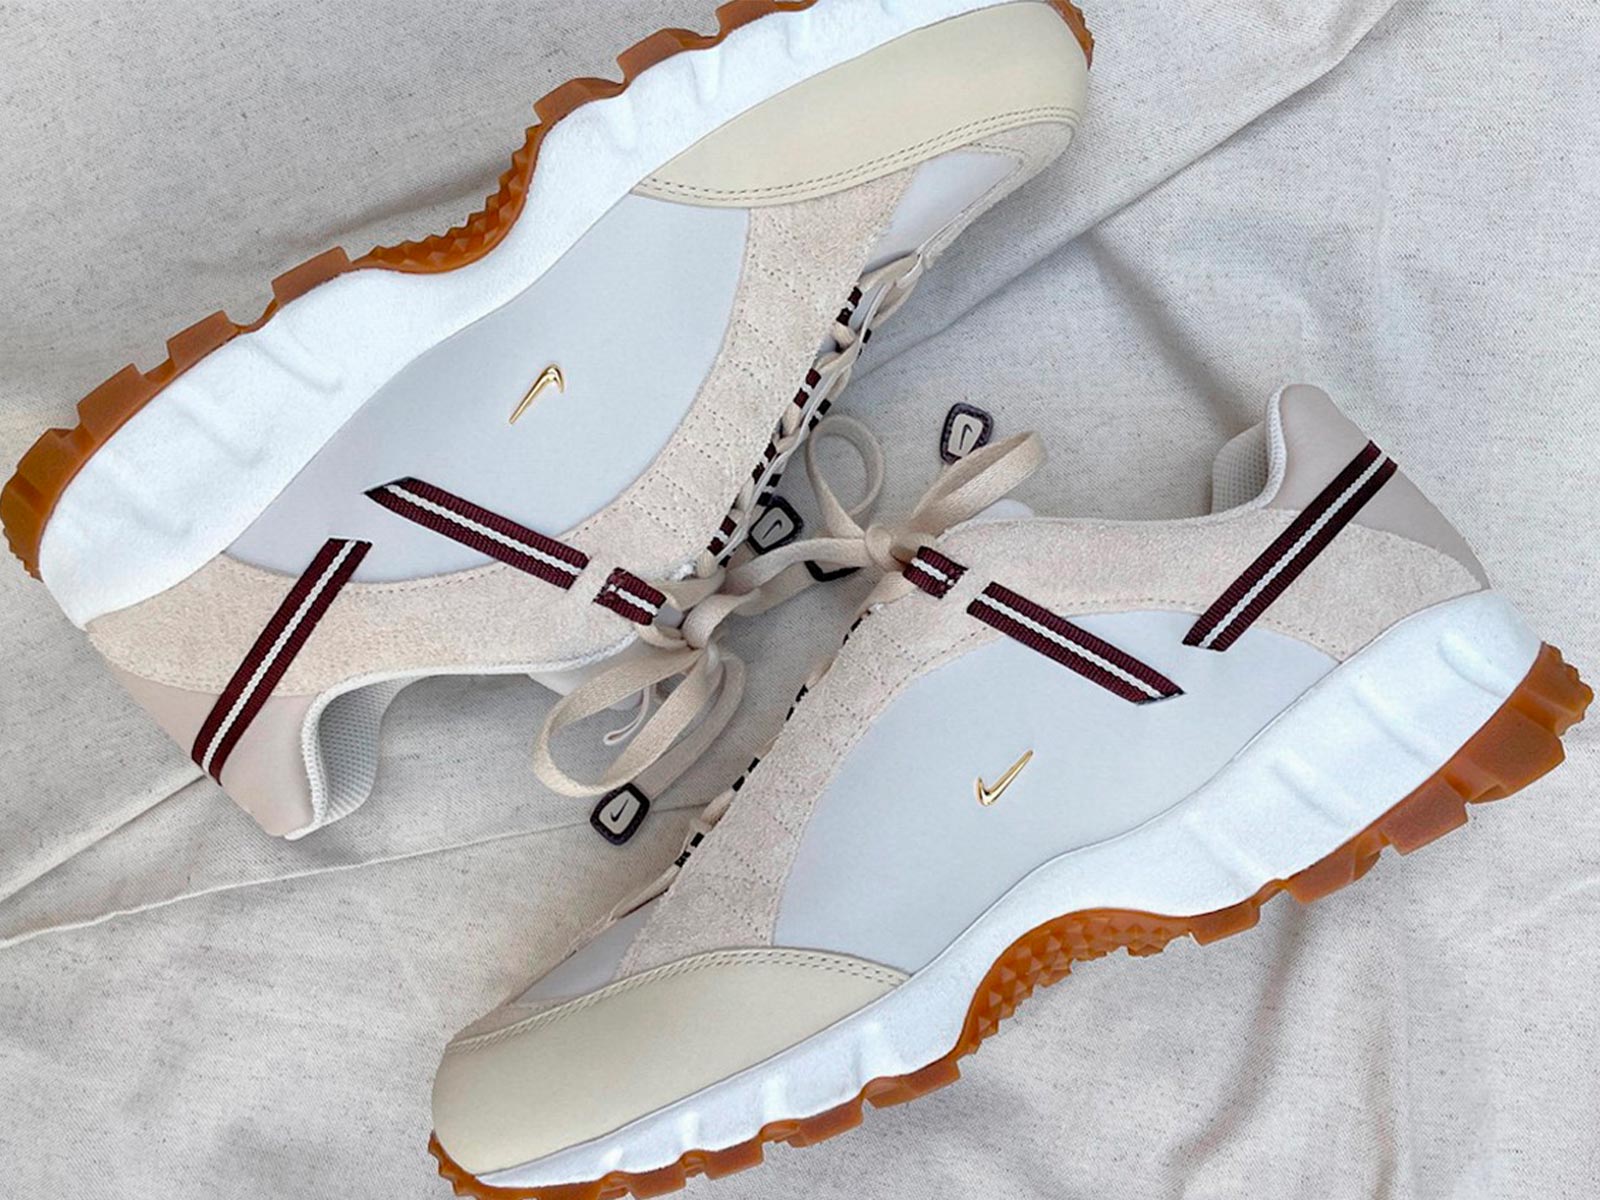 Jacquemus unveils first images of its collaboration with Nike